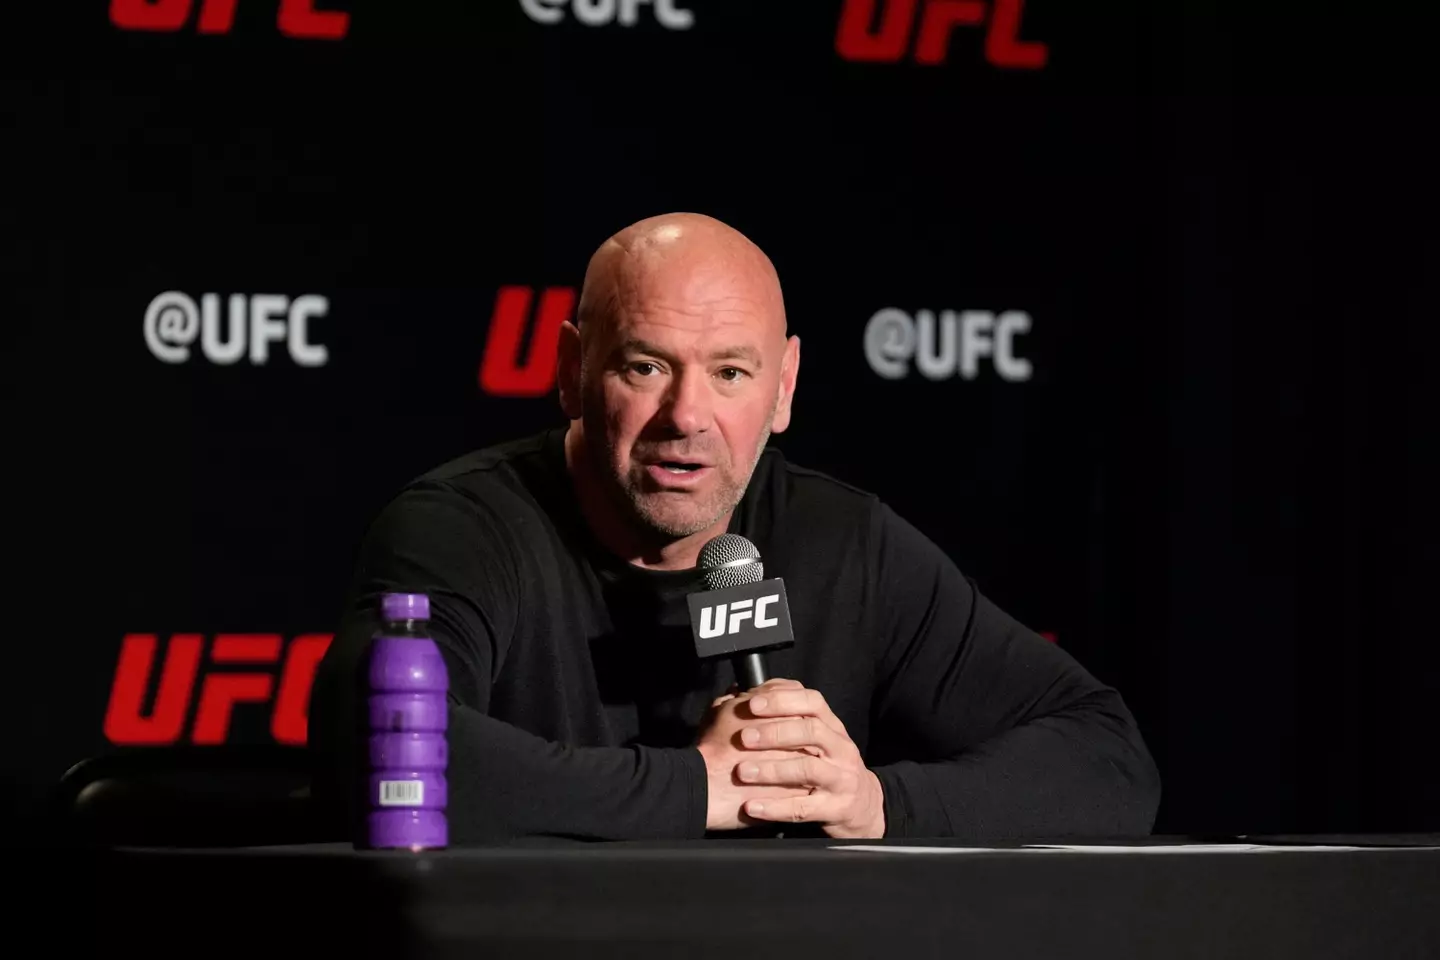 White is also president of the UFC. (Image